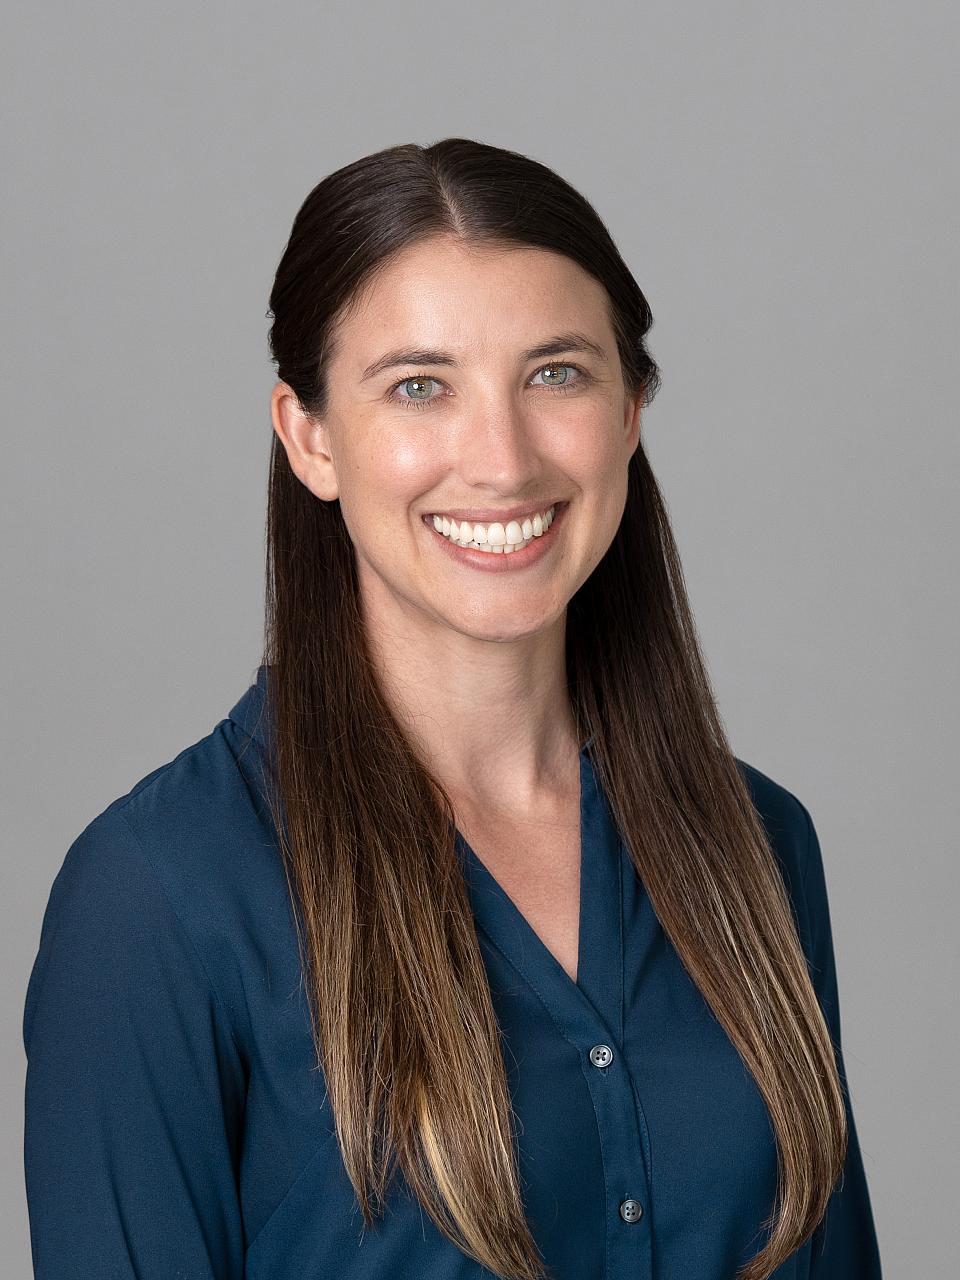 Photo of a woman, Dr. Ashley Goodwin, with long dark hair wearing a dark blue shirt smiling at the camera.